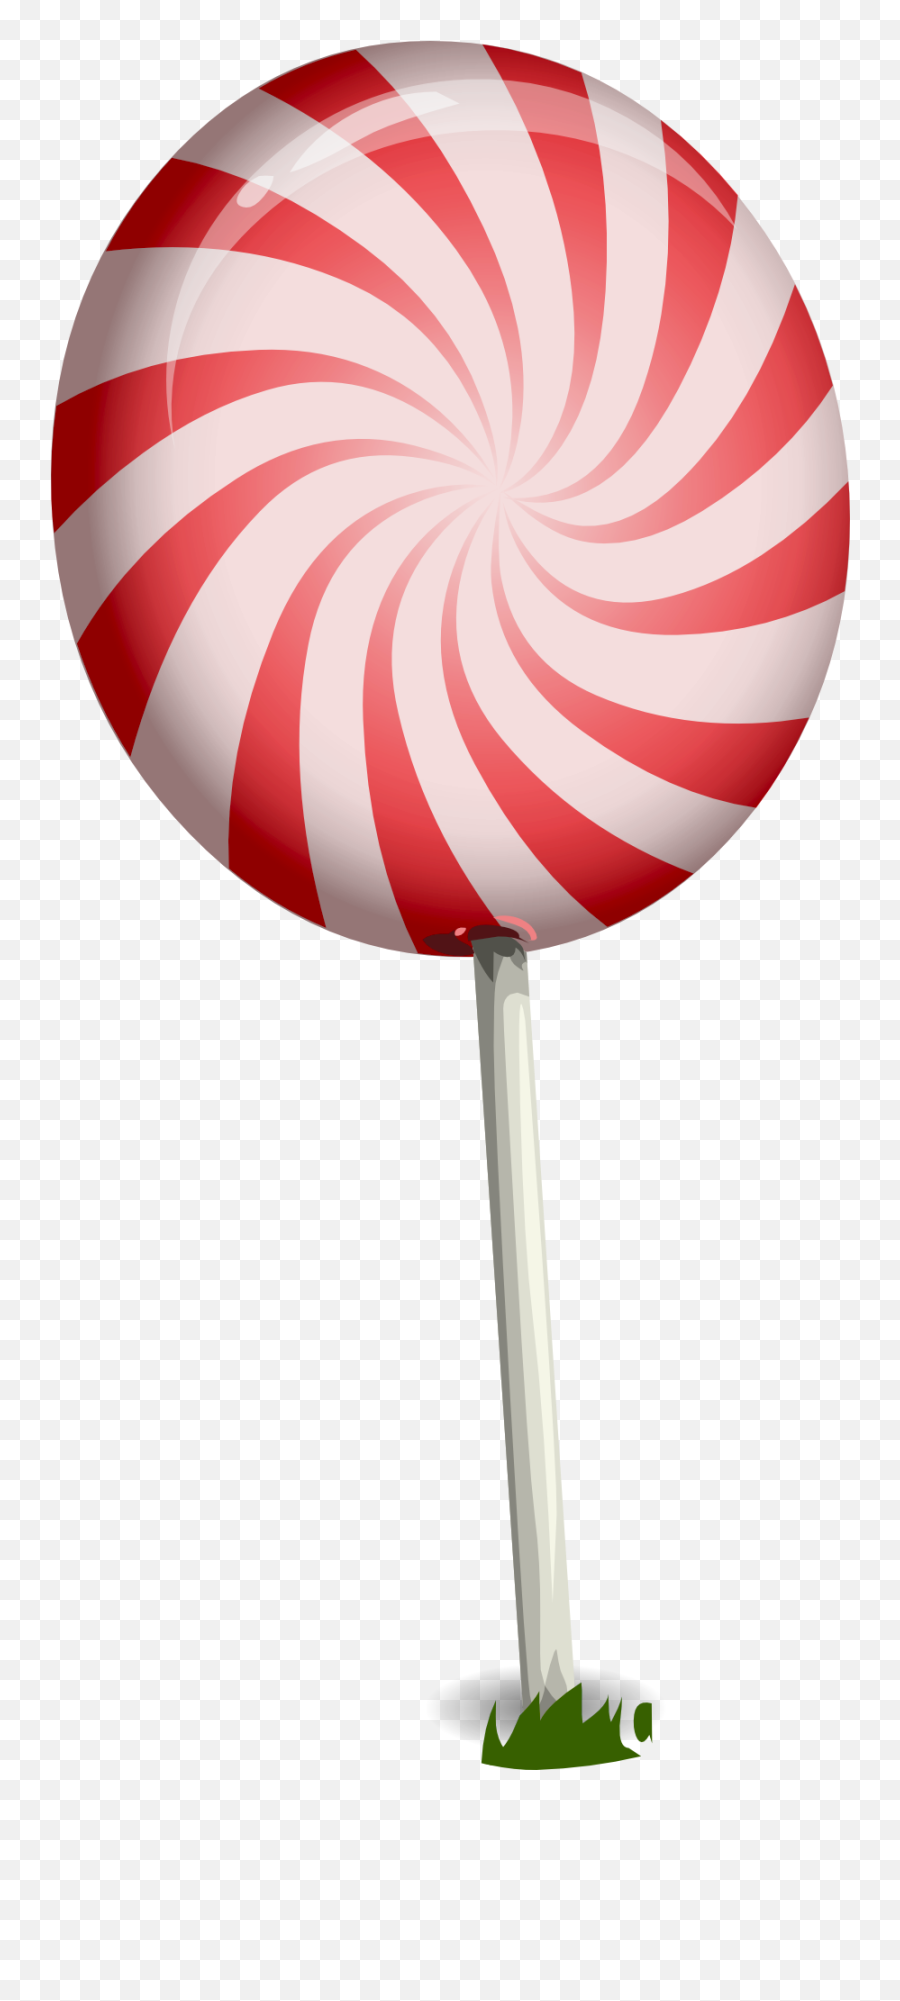 Candy Lollipop Png Transparent Image - Candy Png,Candy Png Transparent